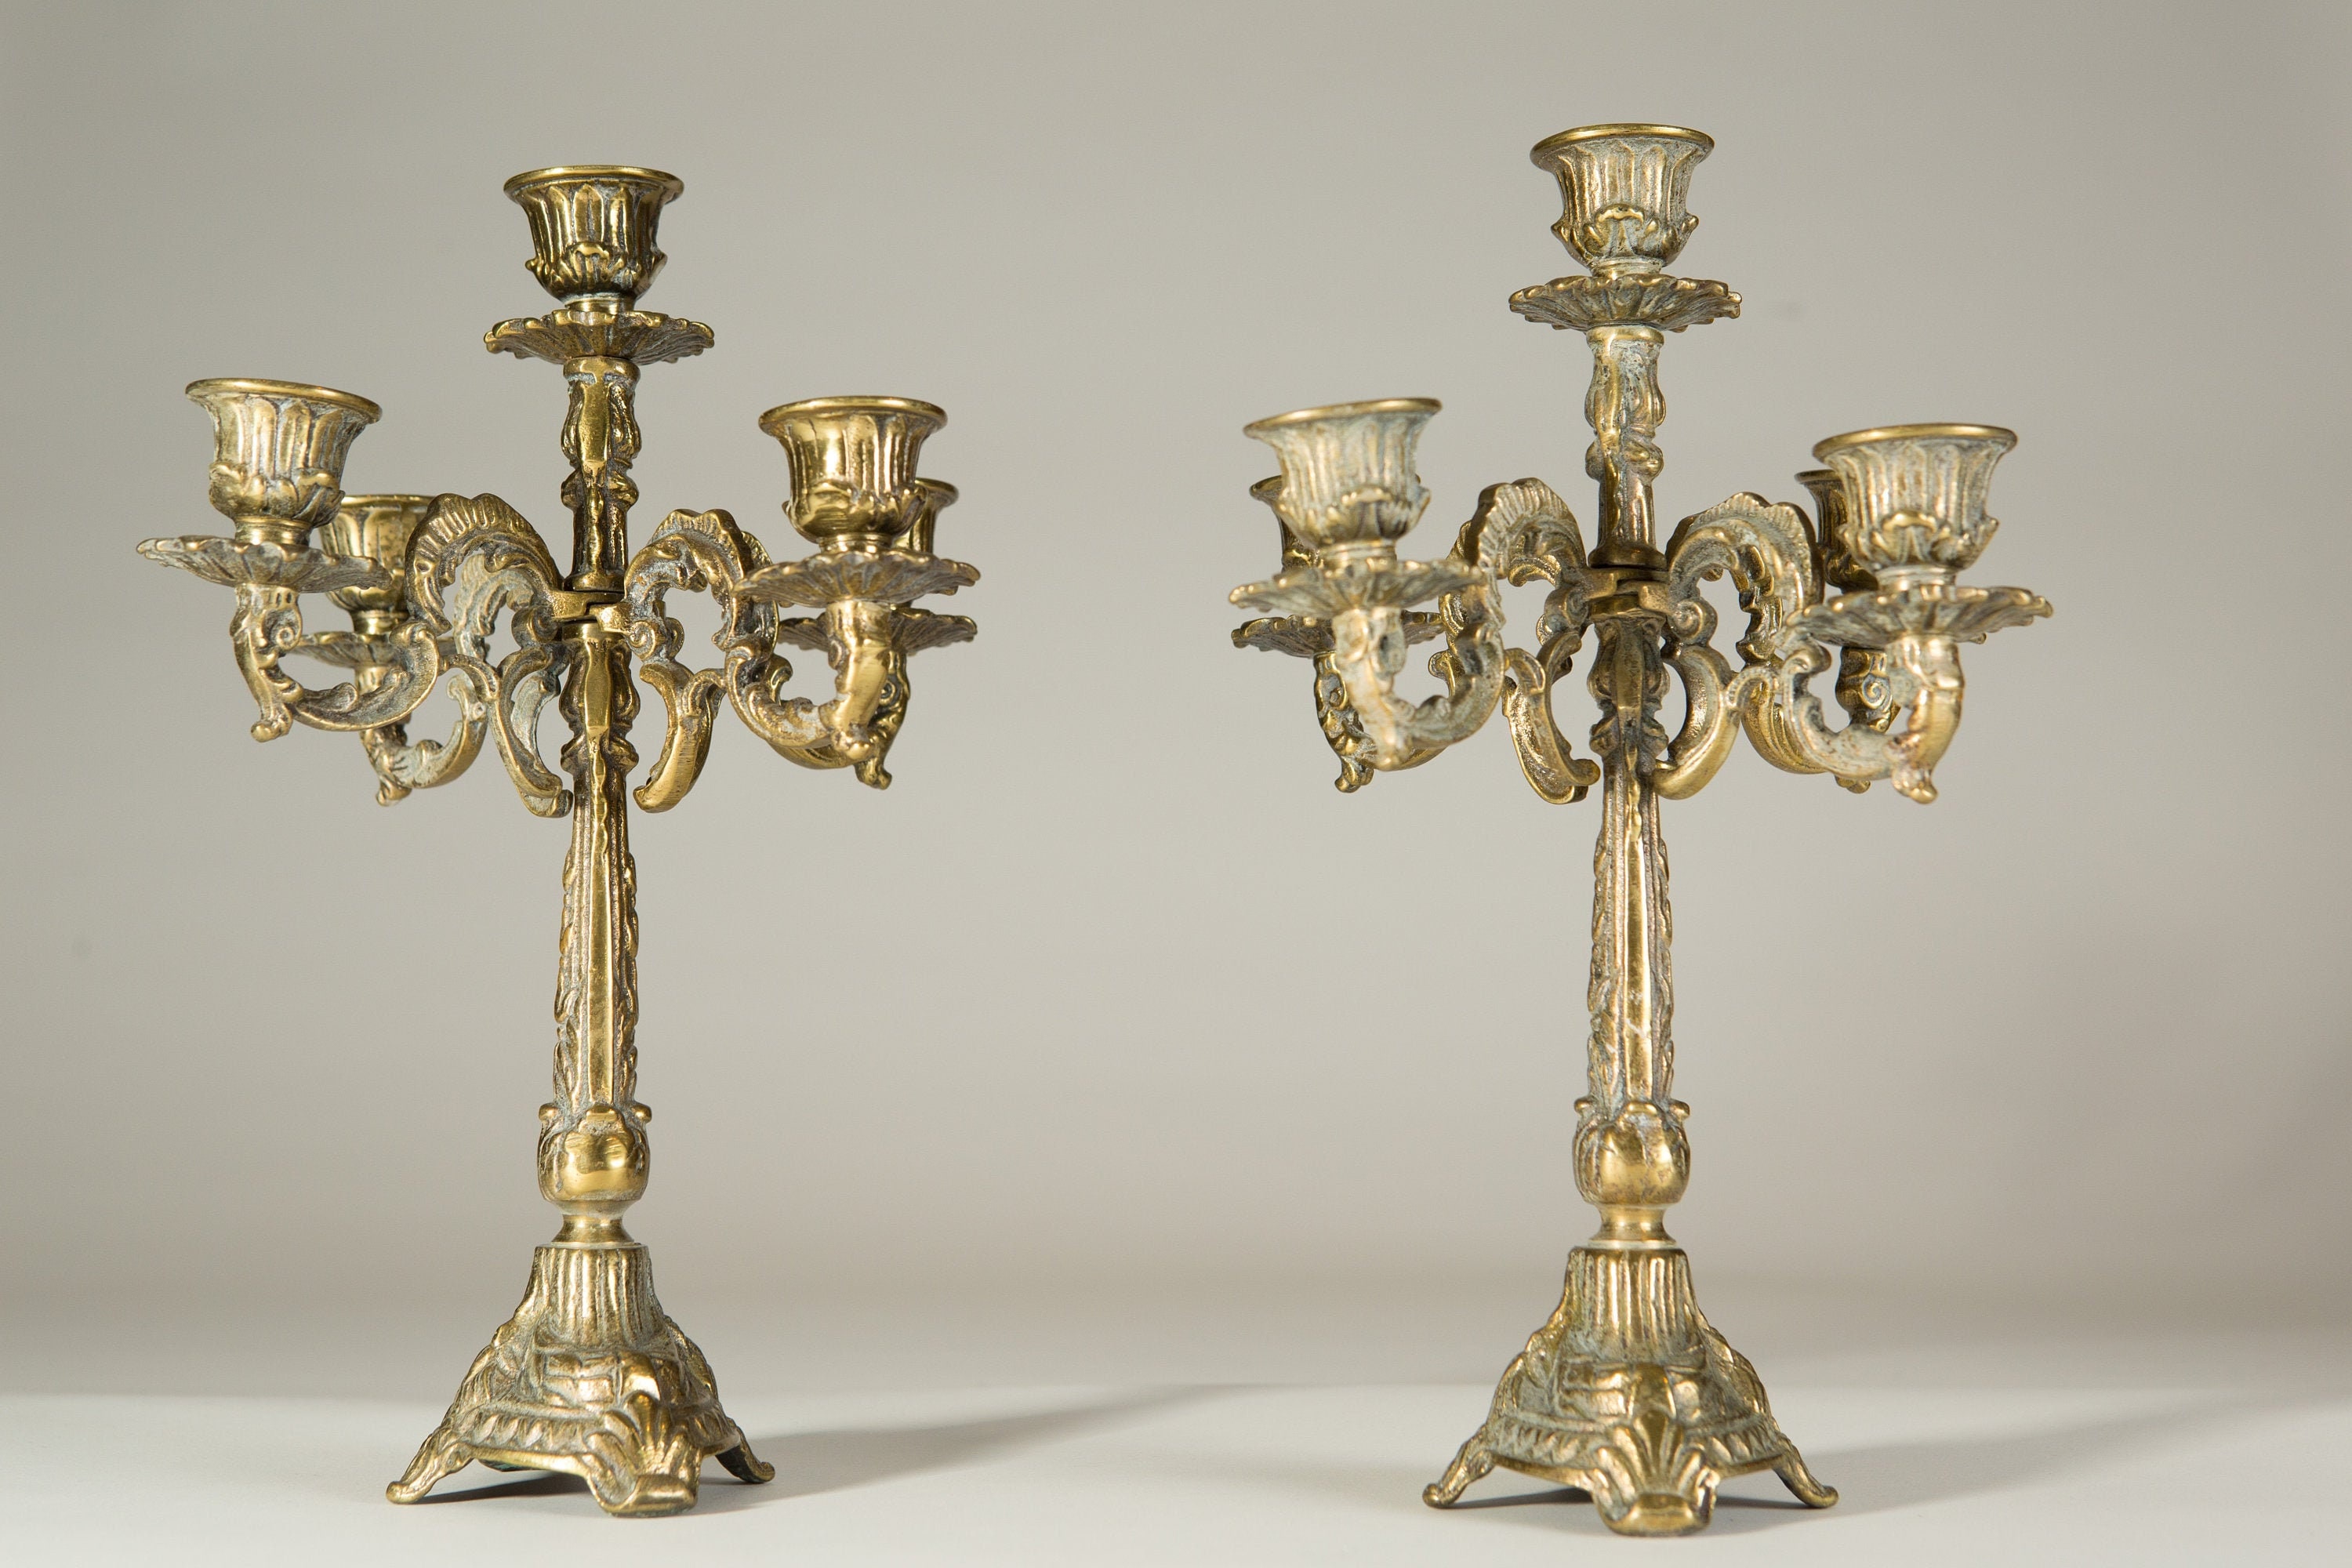 Antique Brass Candelabras - Vintage Church Style Candlestick Holders -  Renaissance Gothic Medieval Large Pair of Ornate Candle Holders